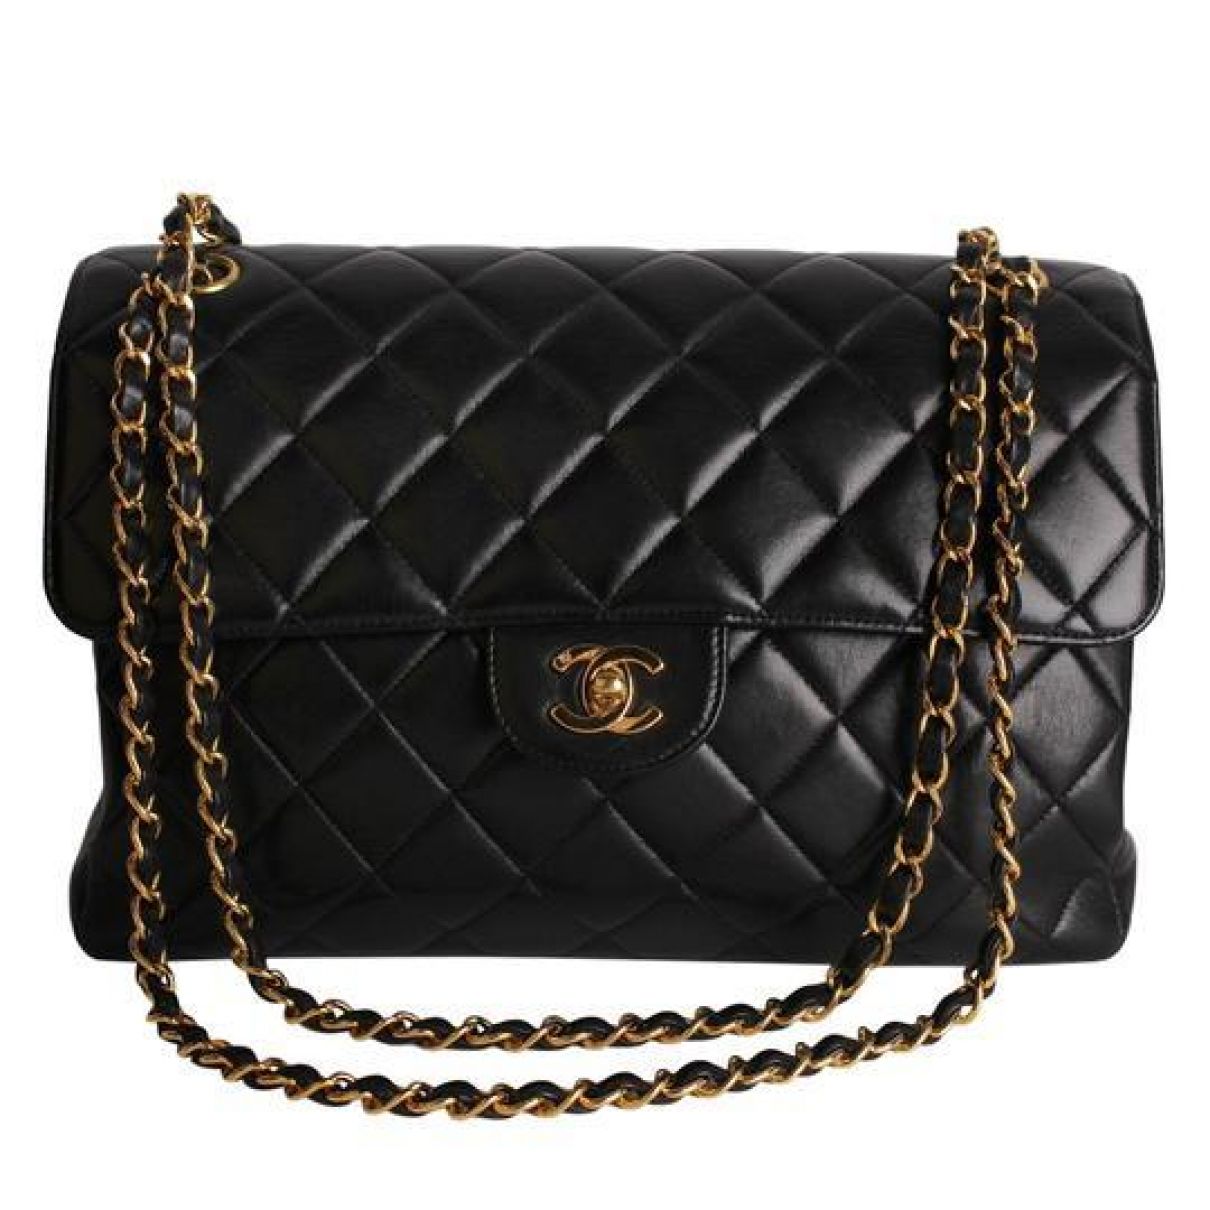 Timeless/classique leather handbag Chanel Black in Leather - 10362714